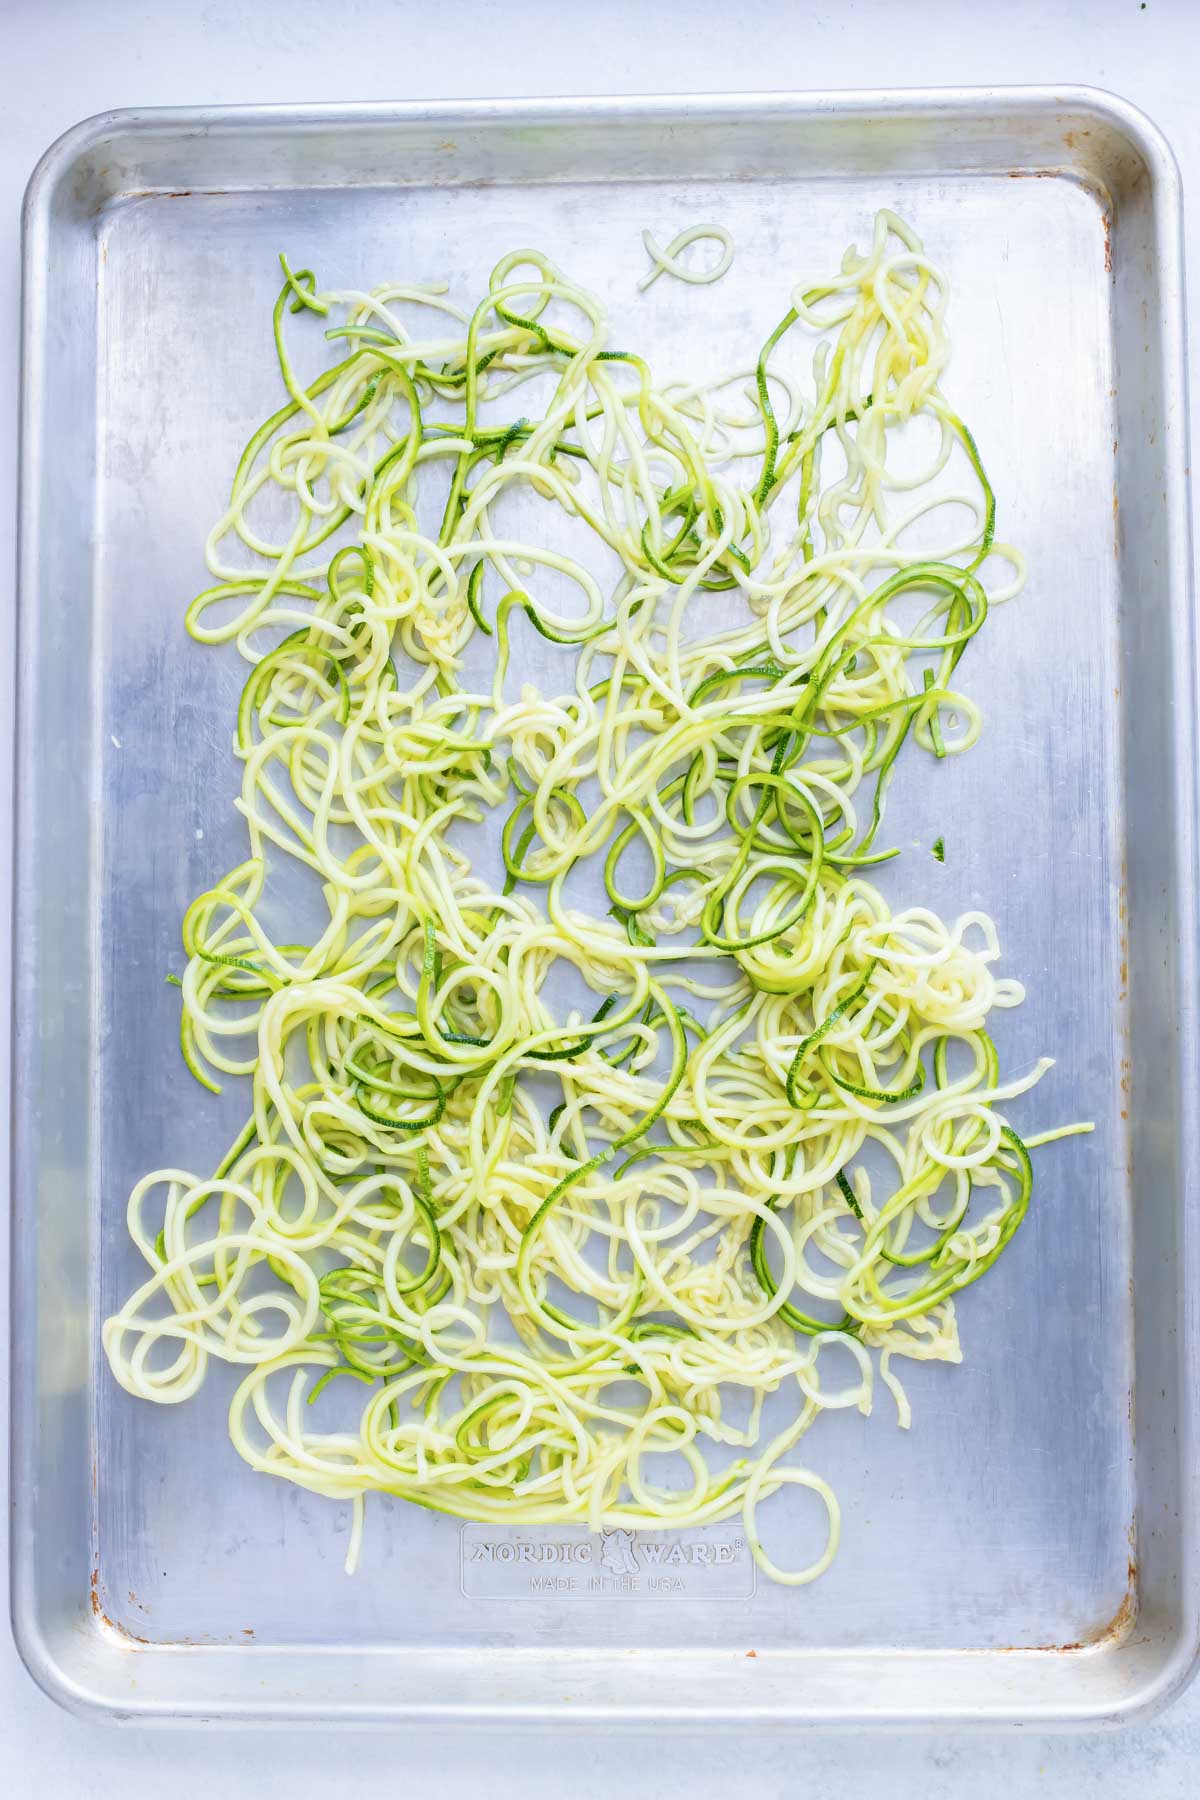 Sprialized zucchini noodles on a baking sheet.